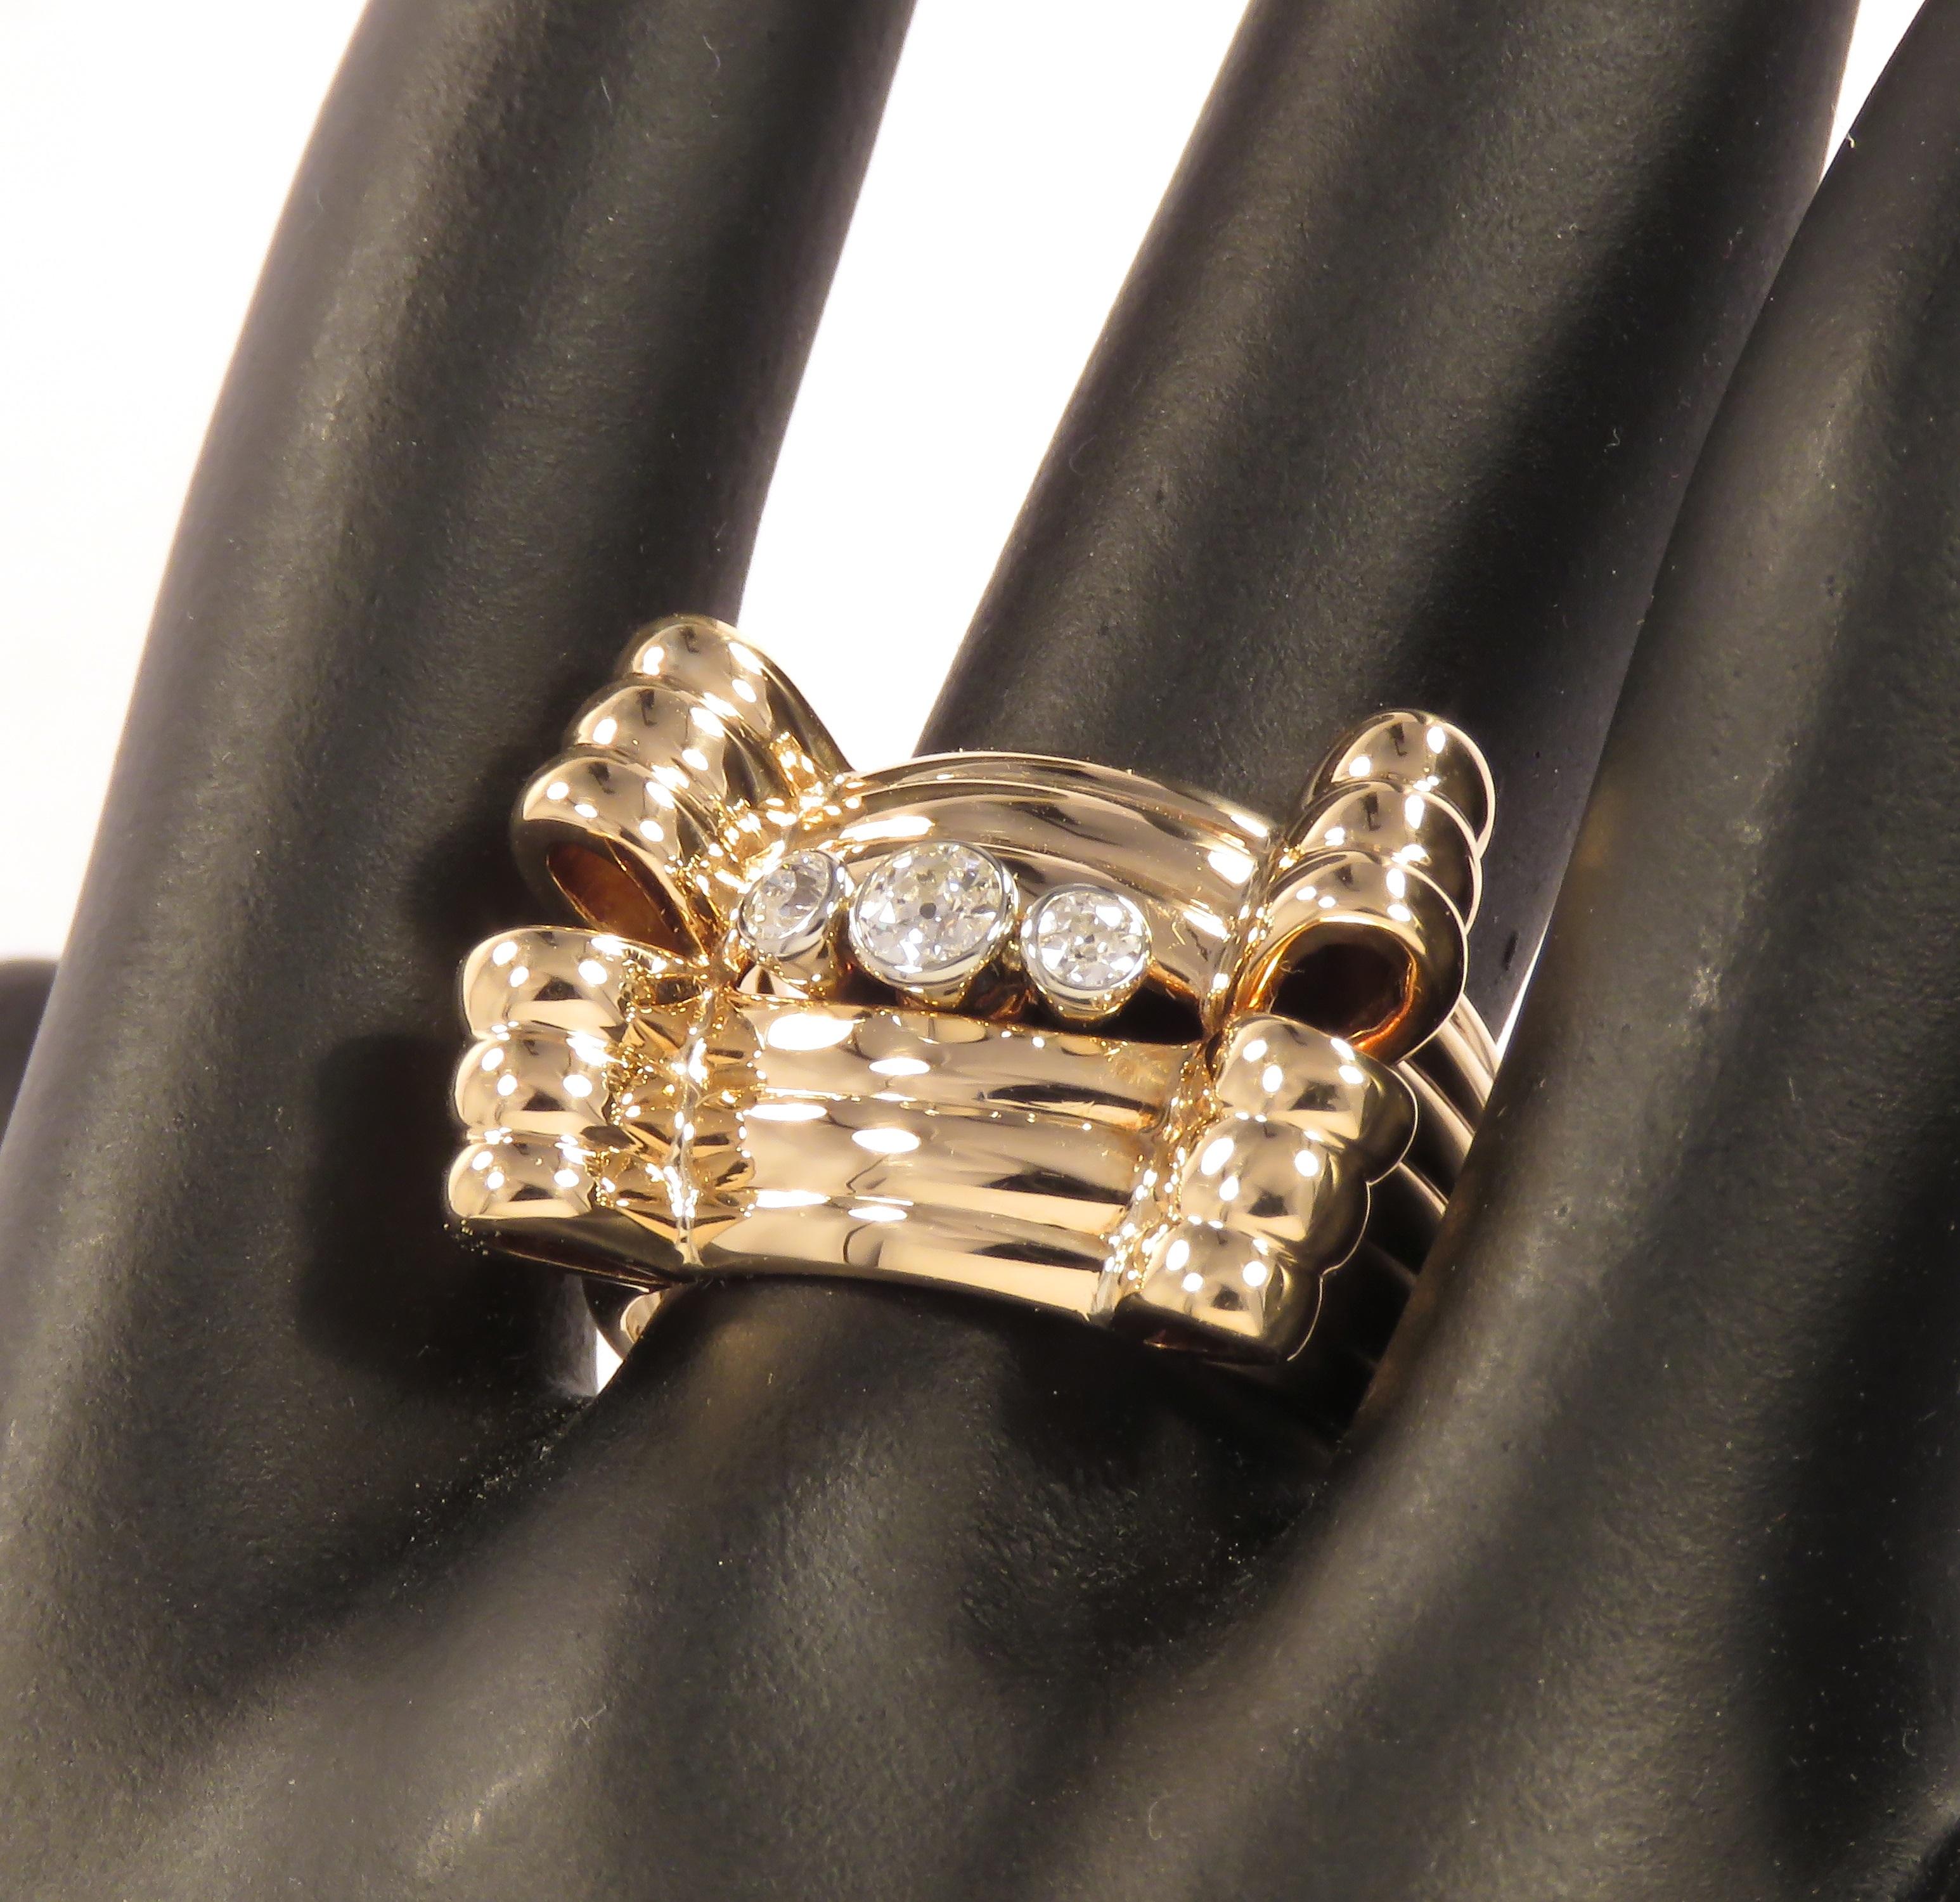 Elegant vintage ring crafted in 18 karat yellow and white gold with 3 white brilliant cut diamonds, circa 0.20 ctw. Size of the upper part of the ring is 23x16 mm / 0.905x0.629 inches. US finger size is 6 3/4, French size 54, Italian size 14,